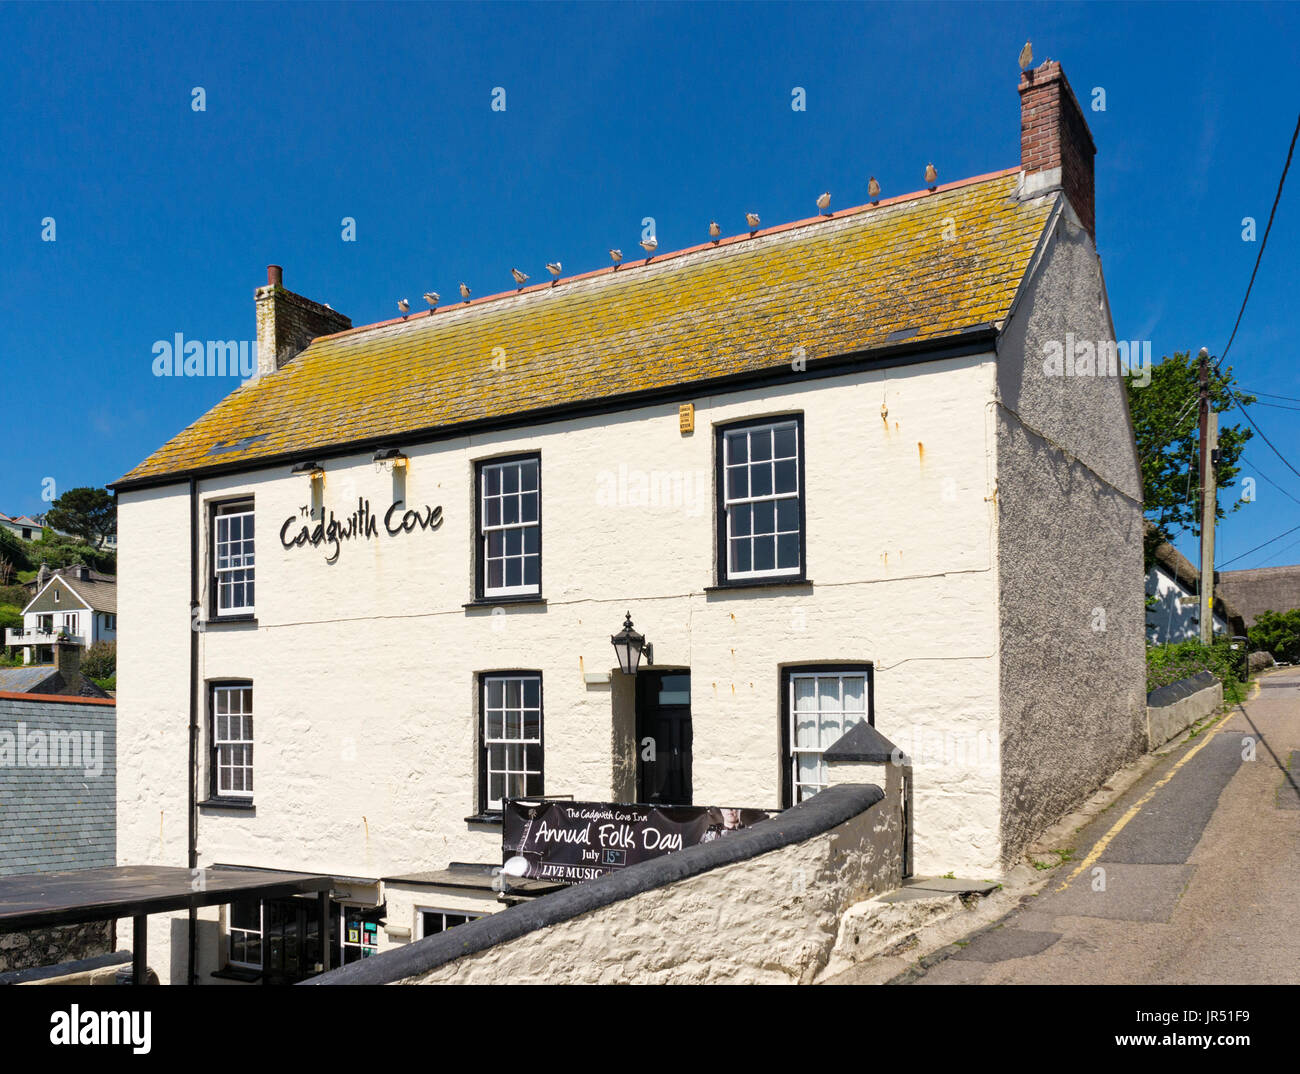 Cadgwith Cove pub, an English pub in Cadgwith village, Lizard Peninsula, Cornwall, UK Stock Photo